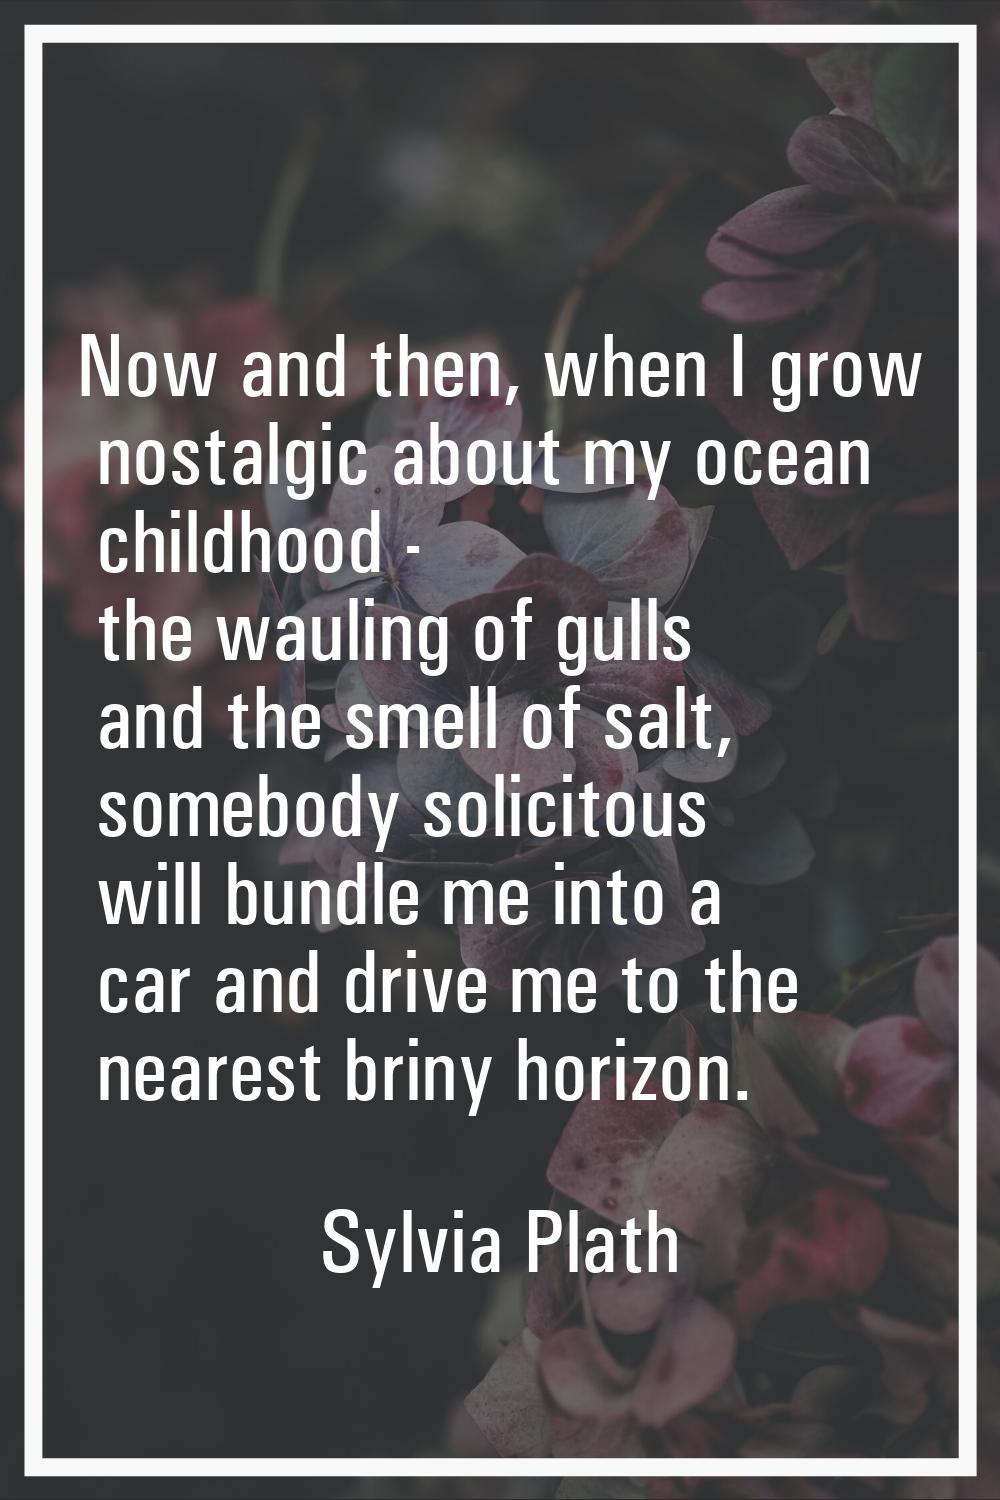 Now and then, when I grow nostalgic about my ocean childhood - the wauling of gulls and the smell o